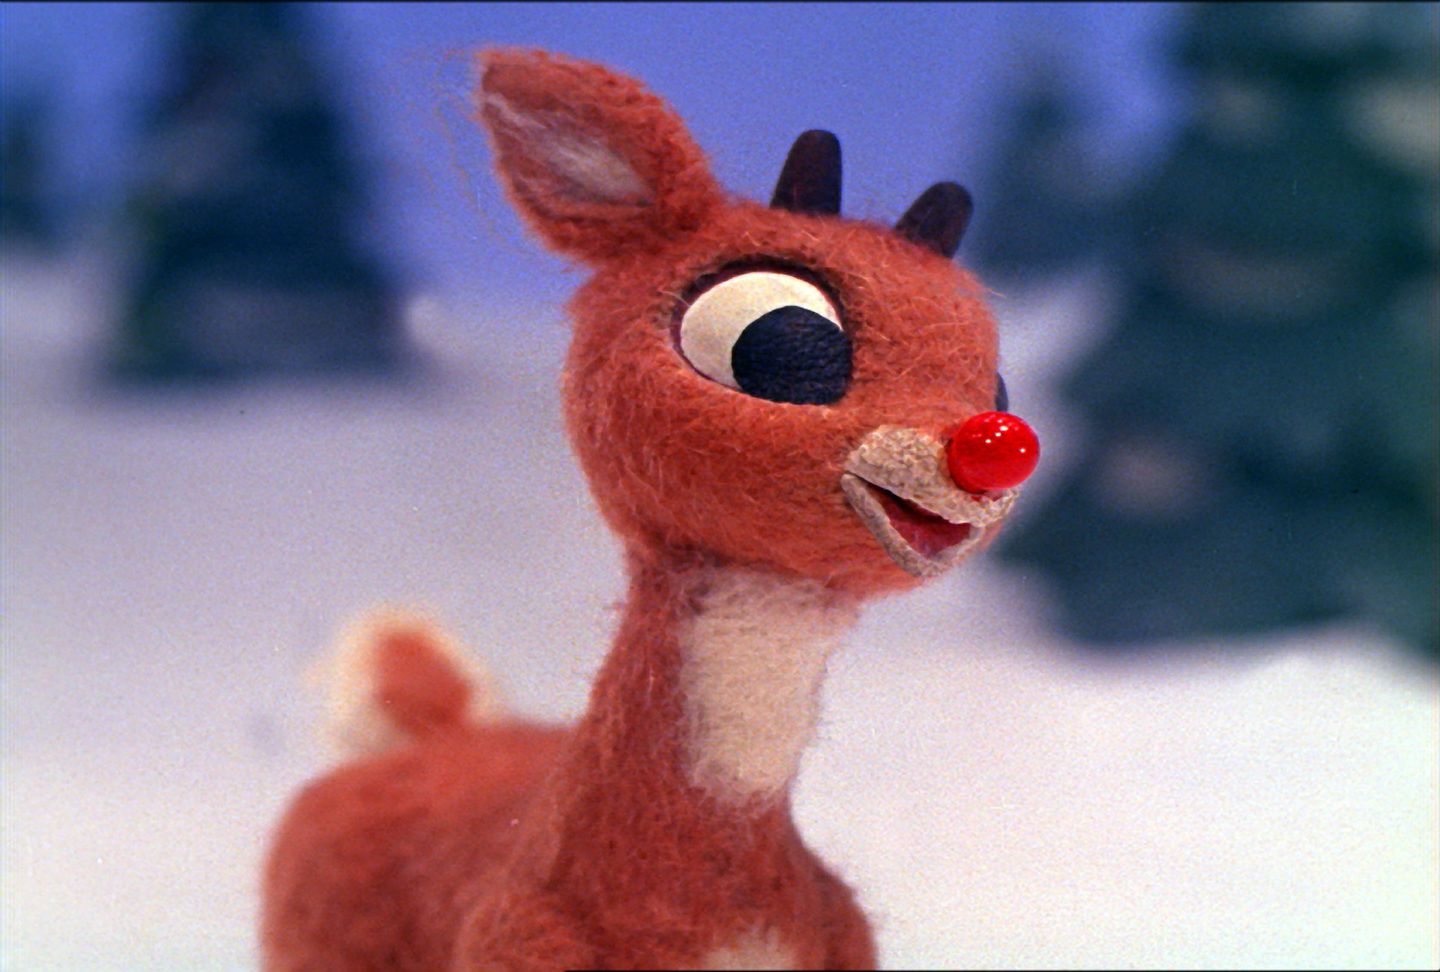 Some People Are Upset About 'rudolph The Red-Nosed Reindeer für Rudolph And The Red Nosed Reindeer